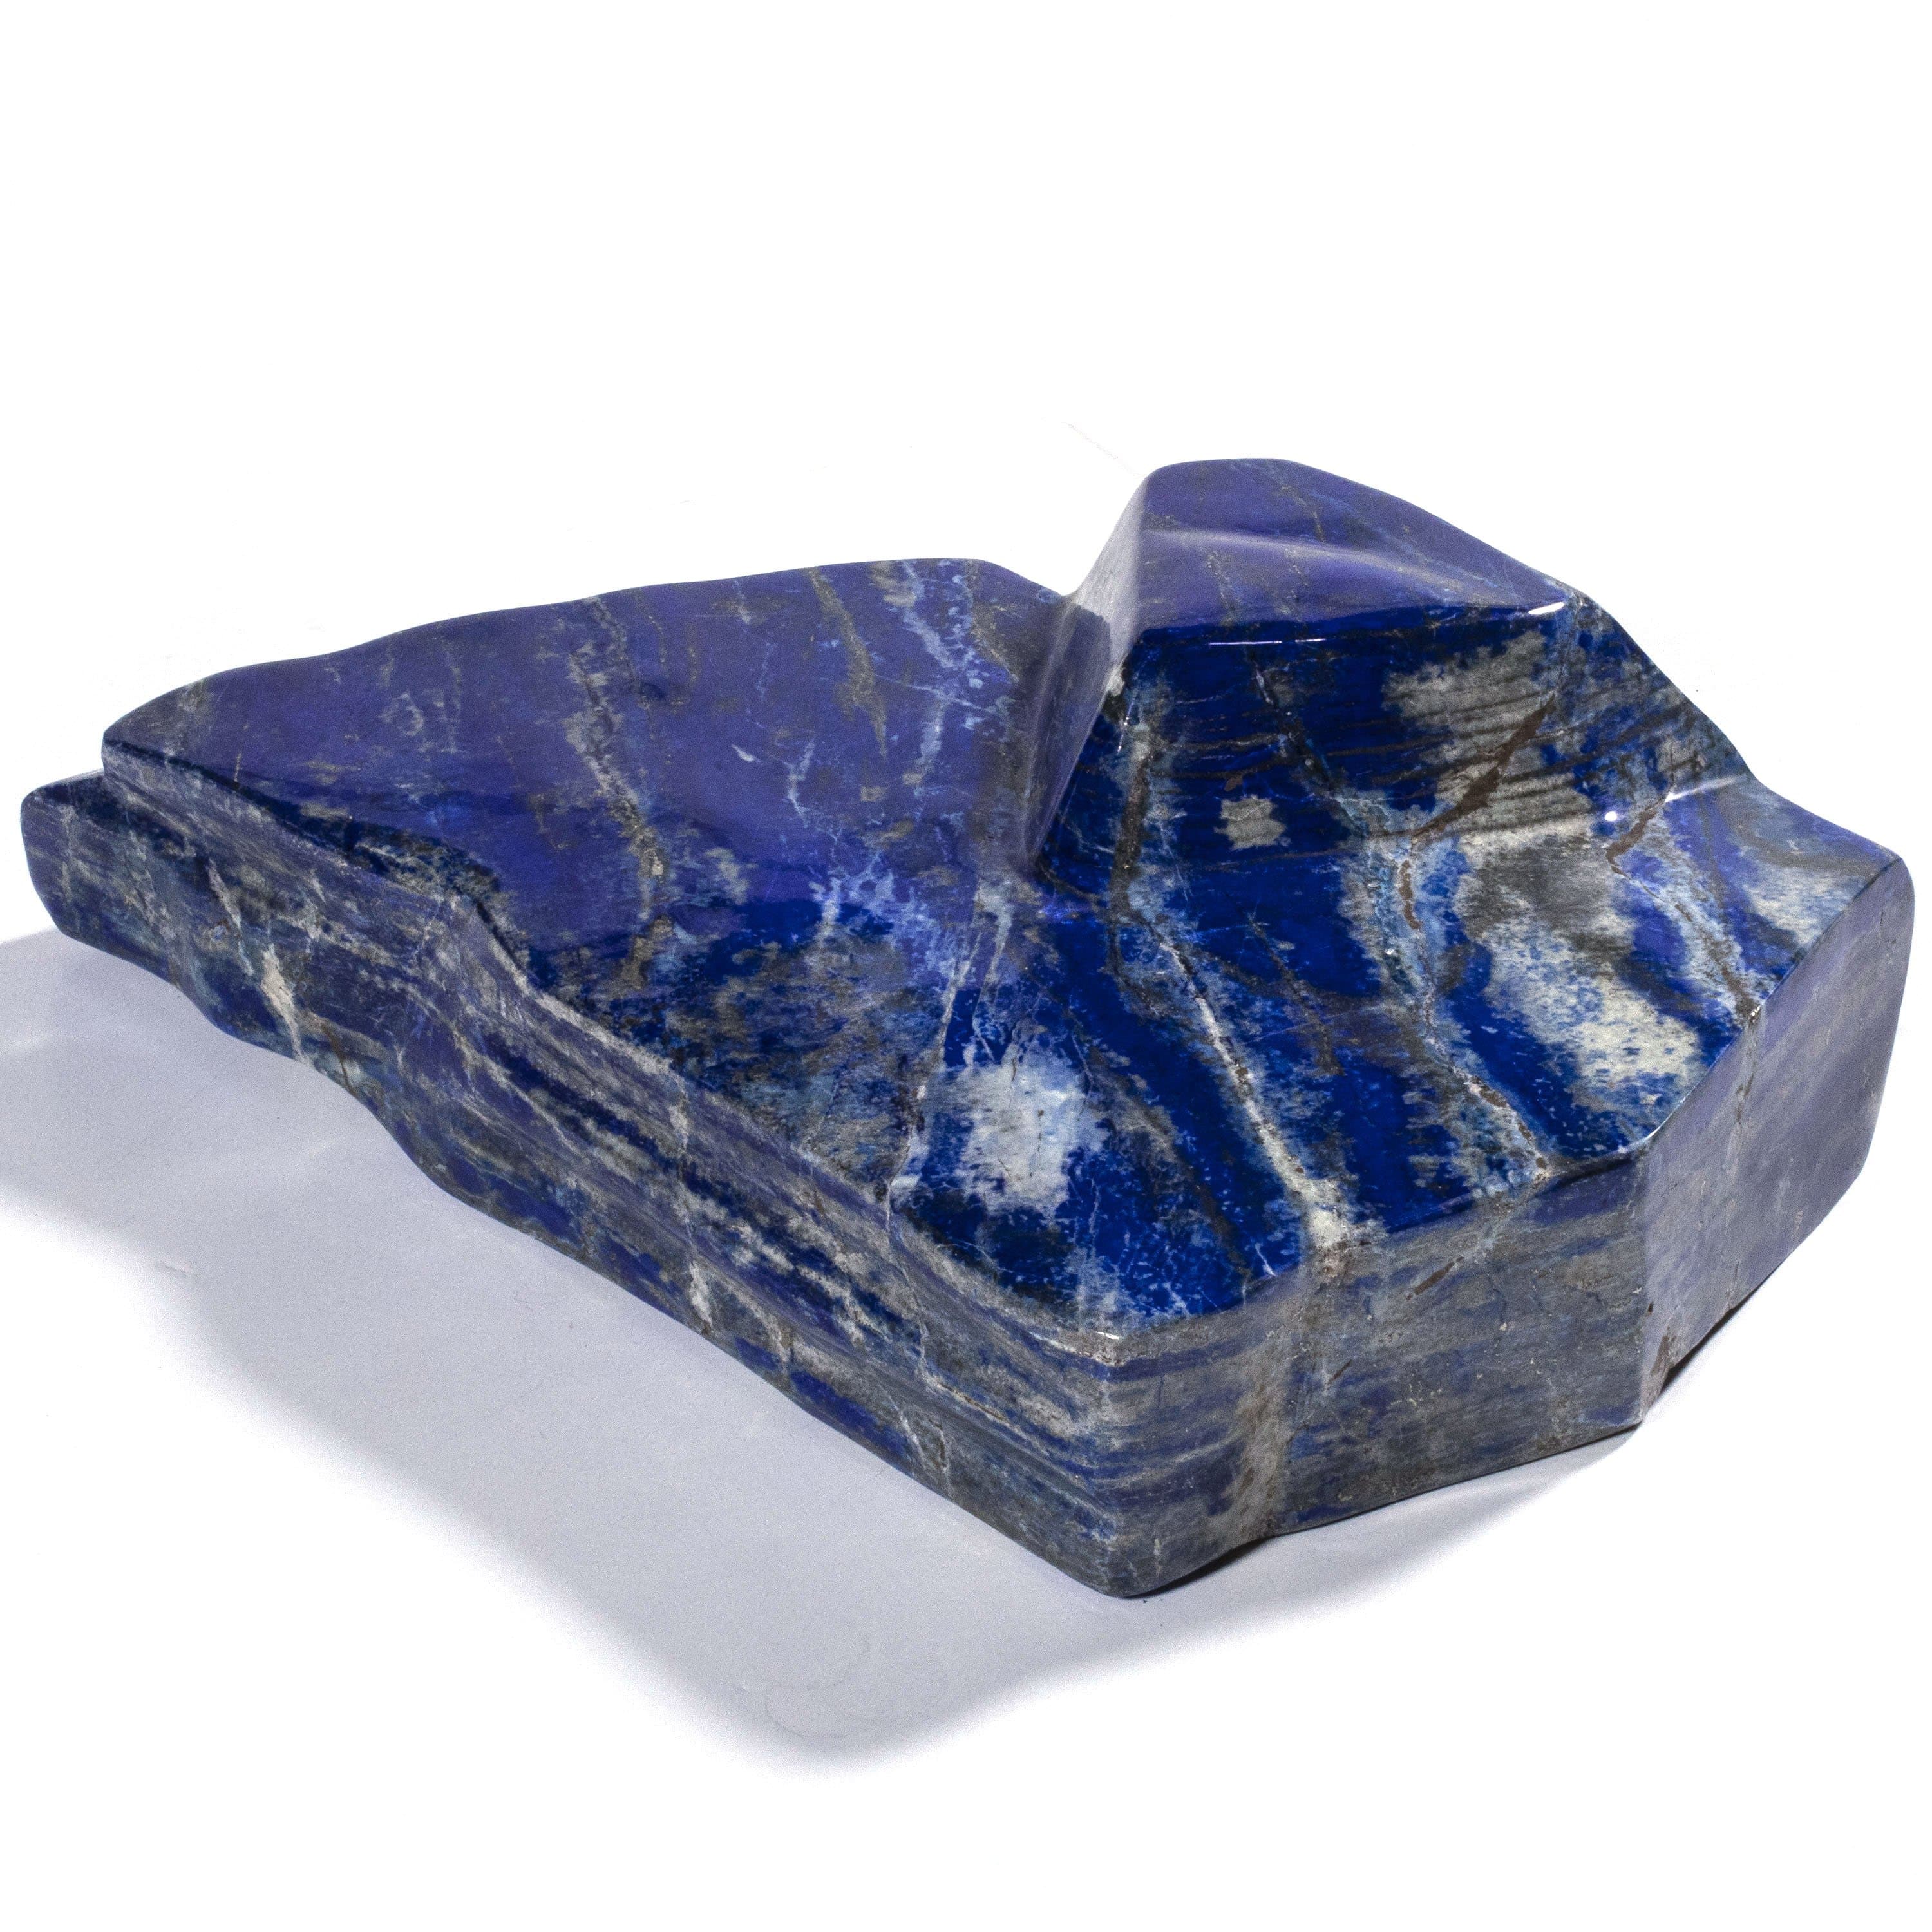 Kalifano Lapis Rare Natural Blue Polished Lapis Lazuli Freeform Carving from Afghanistan - 23.4 kg / 51.6 lbs LPS21000.001